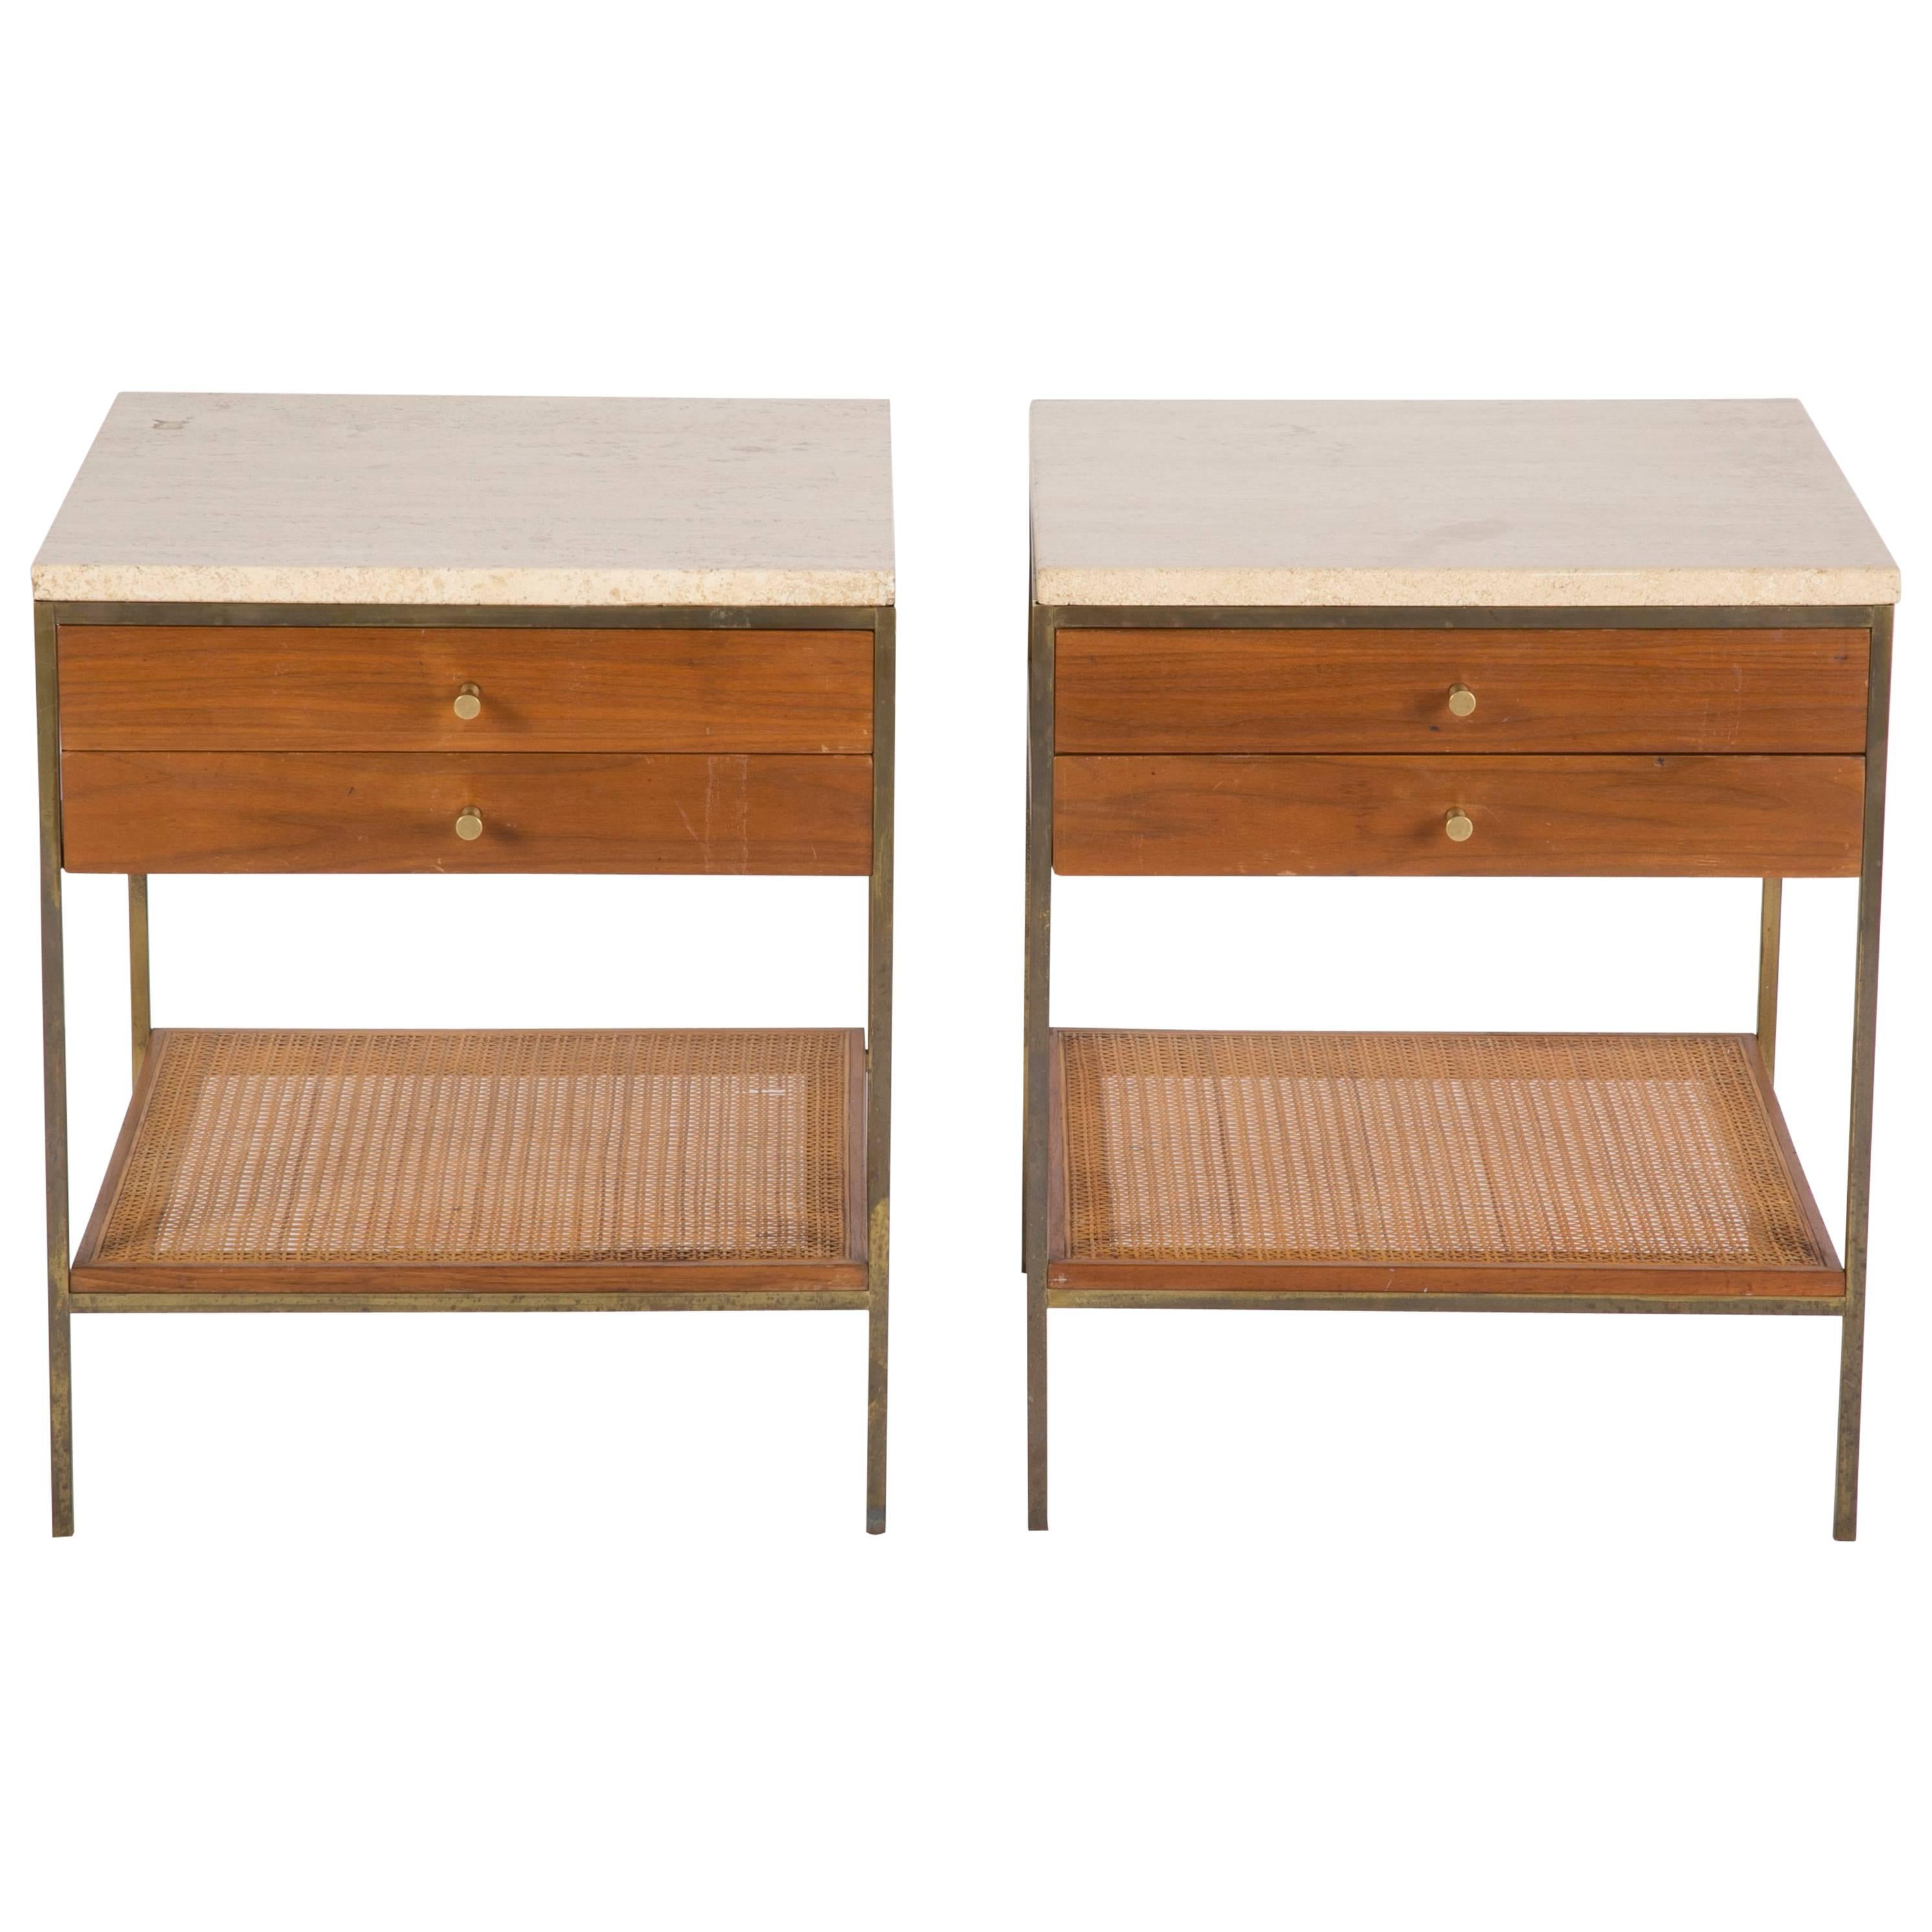 Pair of Paul McCobb Travertine Top Side Tables with Caned Shelves